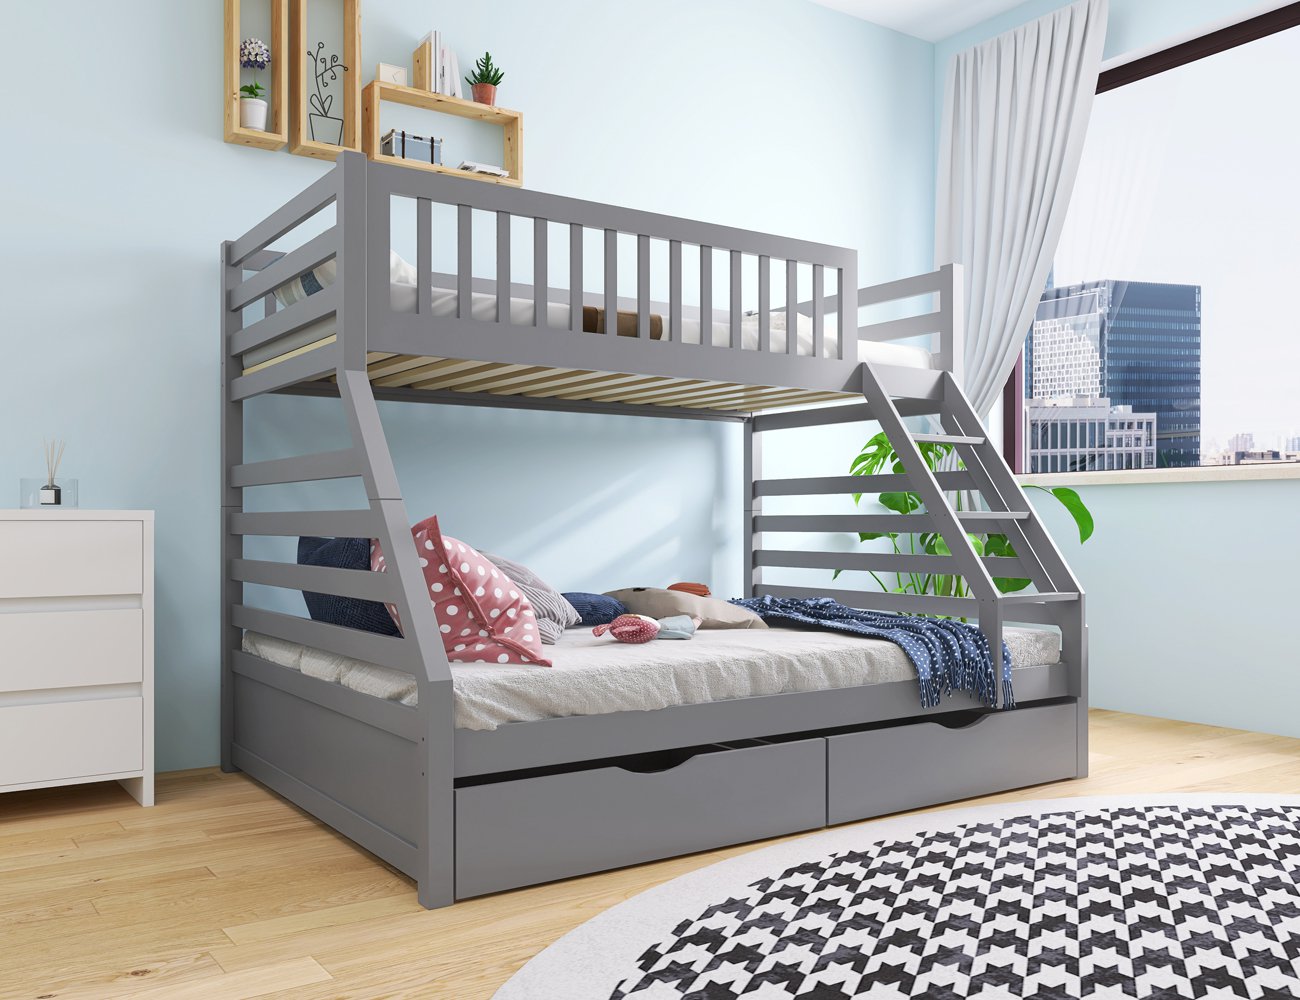 Rocco Double/Single Wooden Bunk Bed Frame - Grey